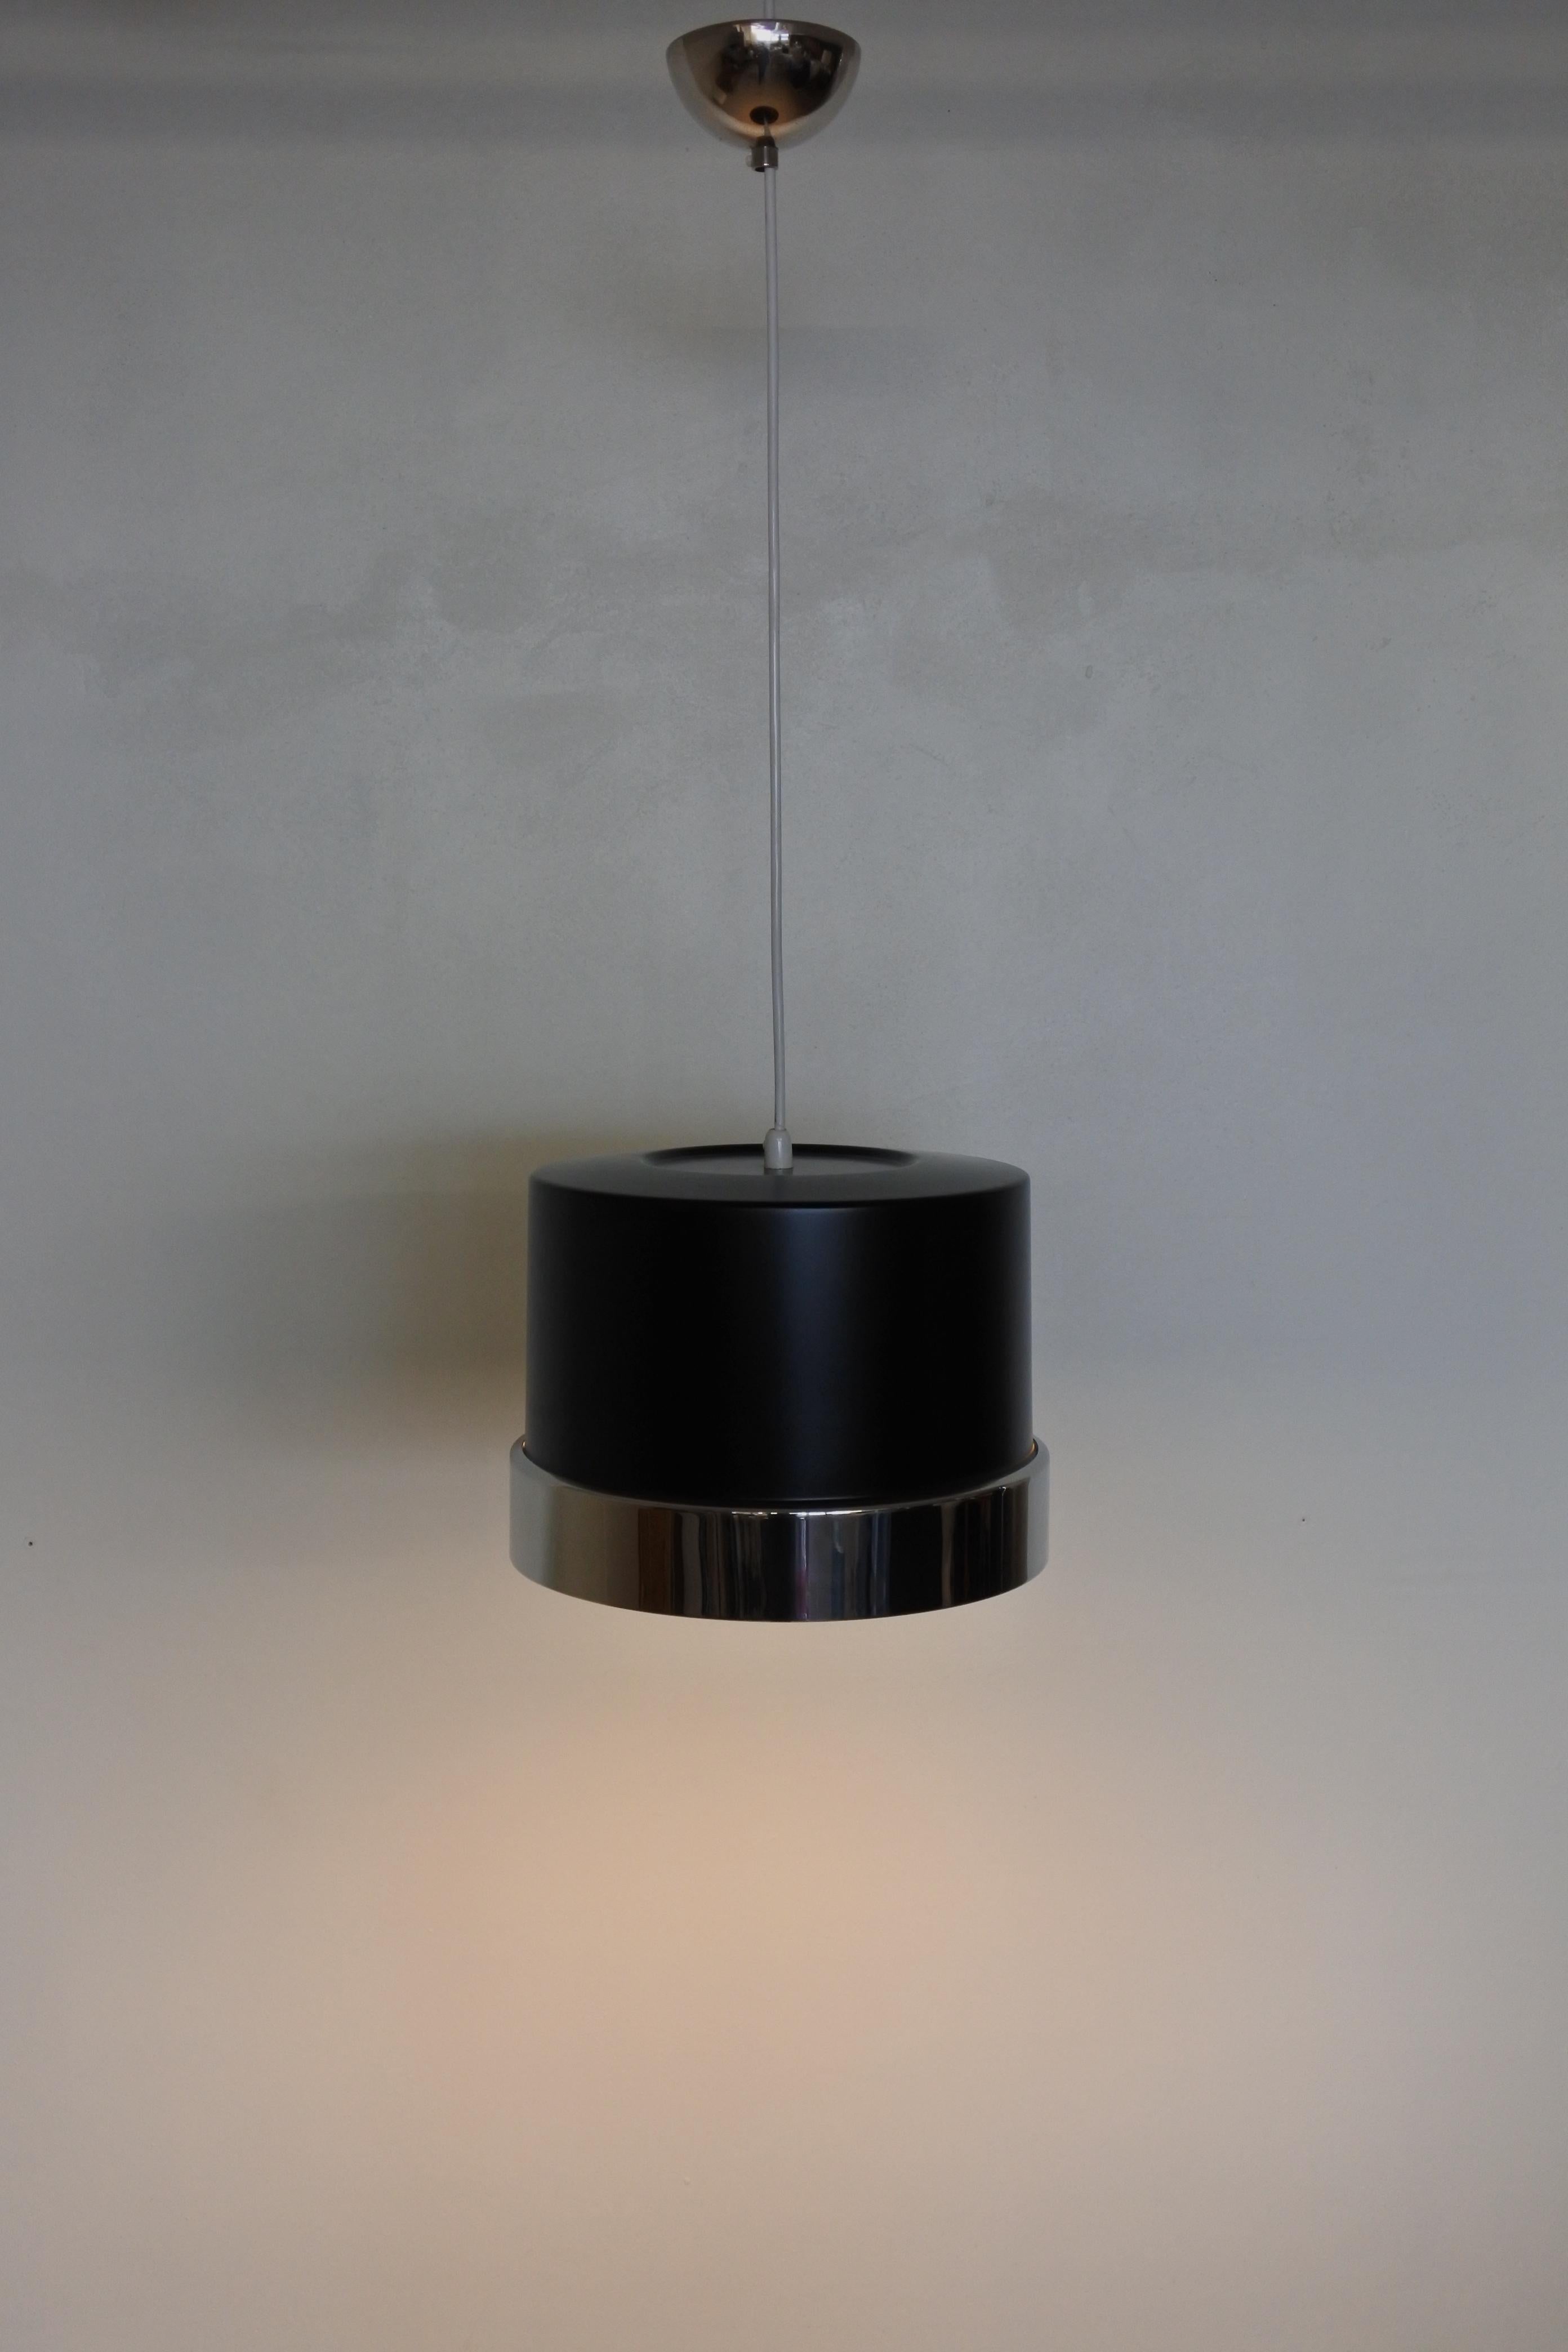 Finnish Lisa Johansson-Pape & Orno Set of Two Pendant Lights, Finland, 1960s For Sale